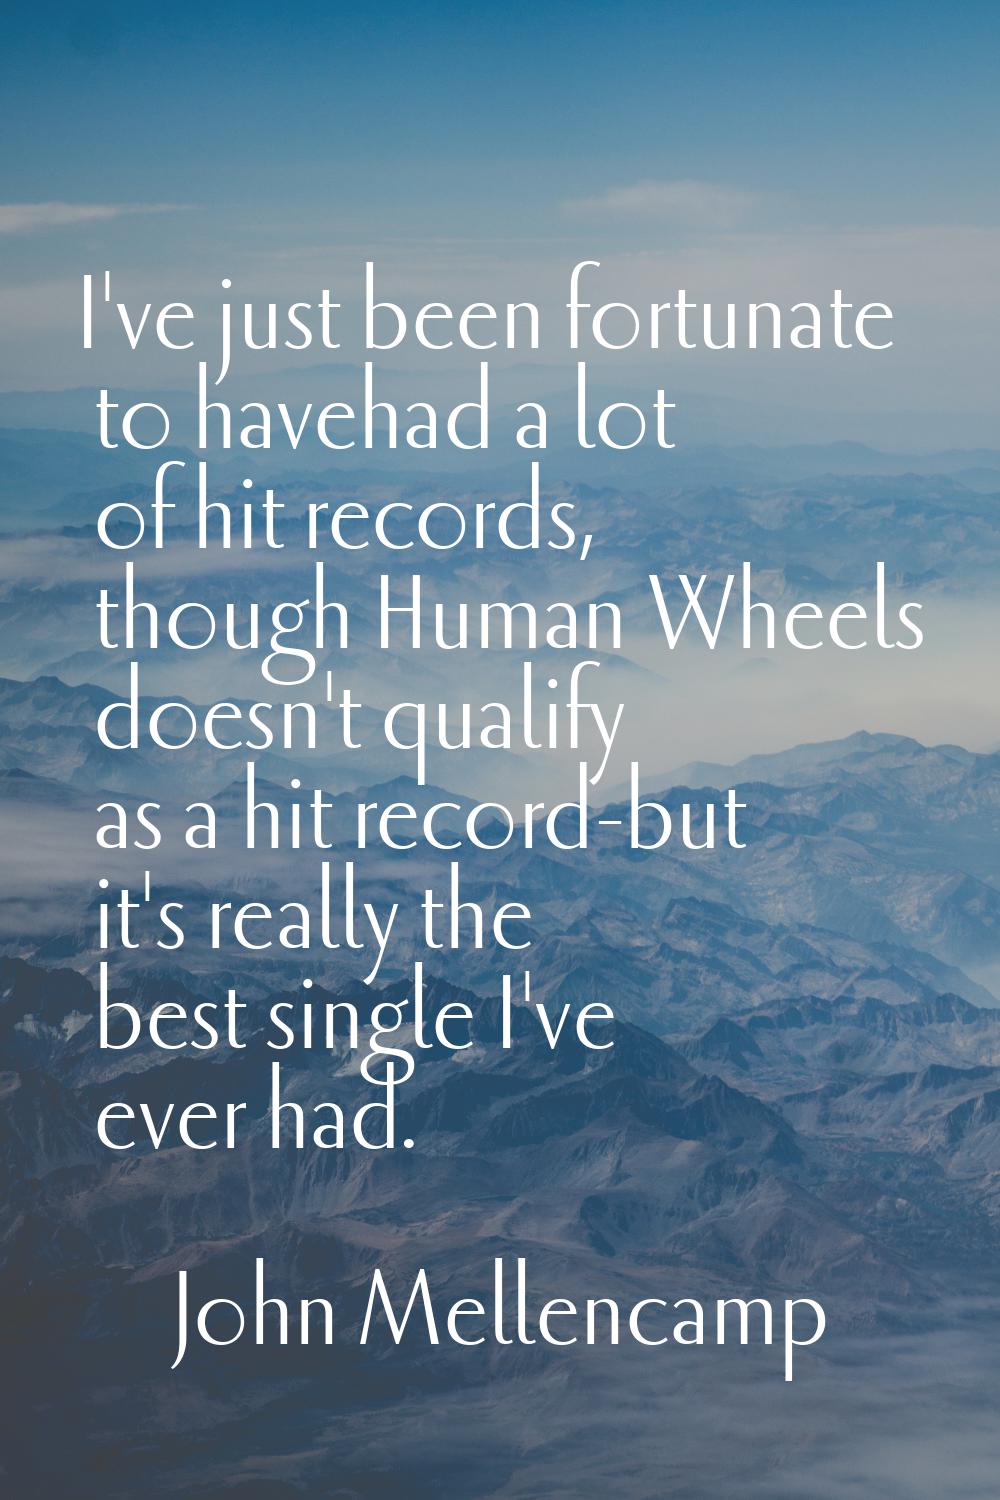 I've just been fortunate to havehad a lot of hit records, though Human Wheels doesn't qualify as a 